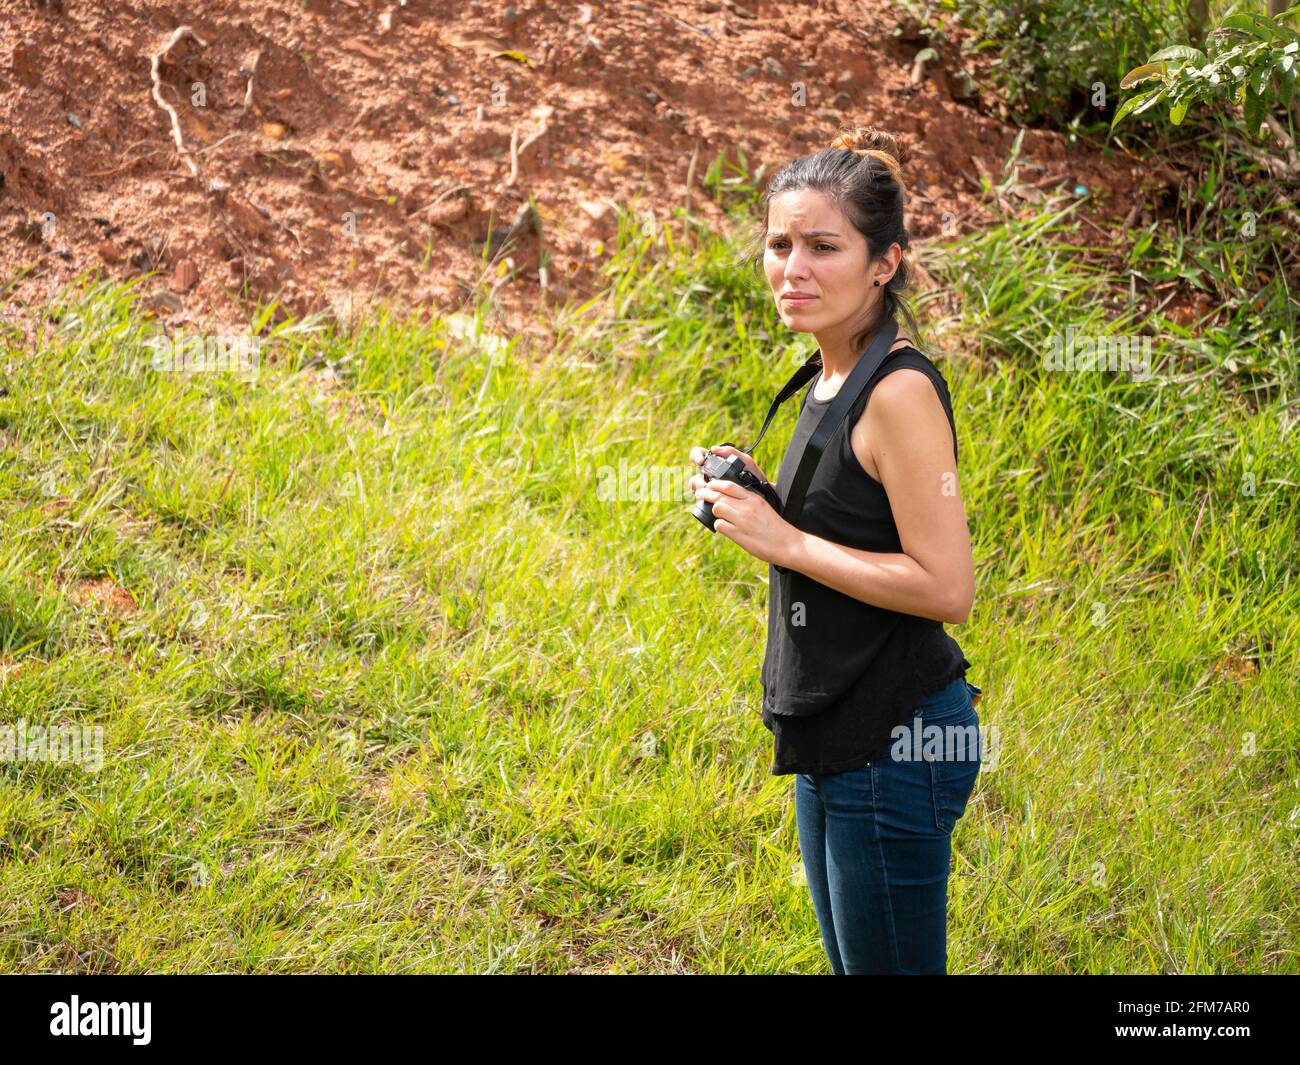 Young Short Hispanic Woman in Blue Jeans and Black Shirt Takes Picture with Compact Mirrorless Camera Stock Photo